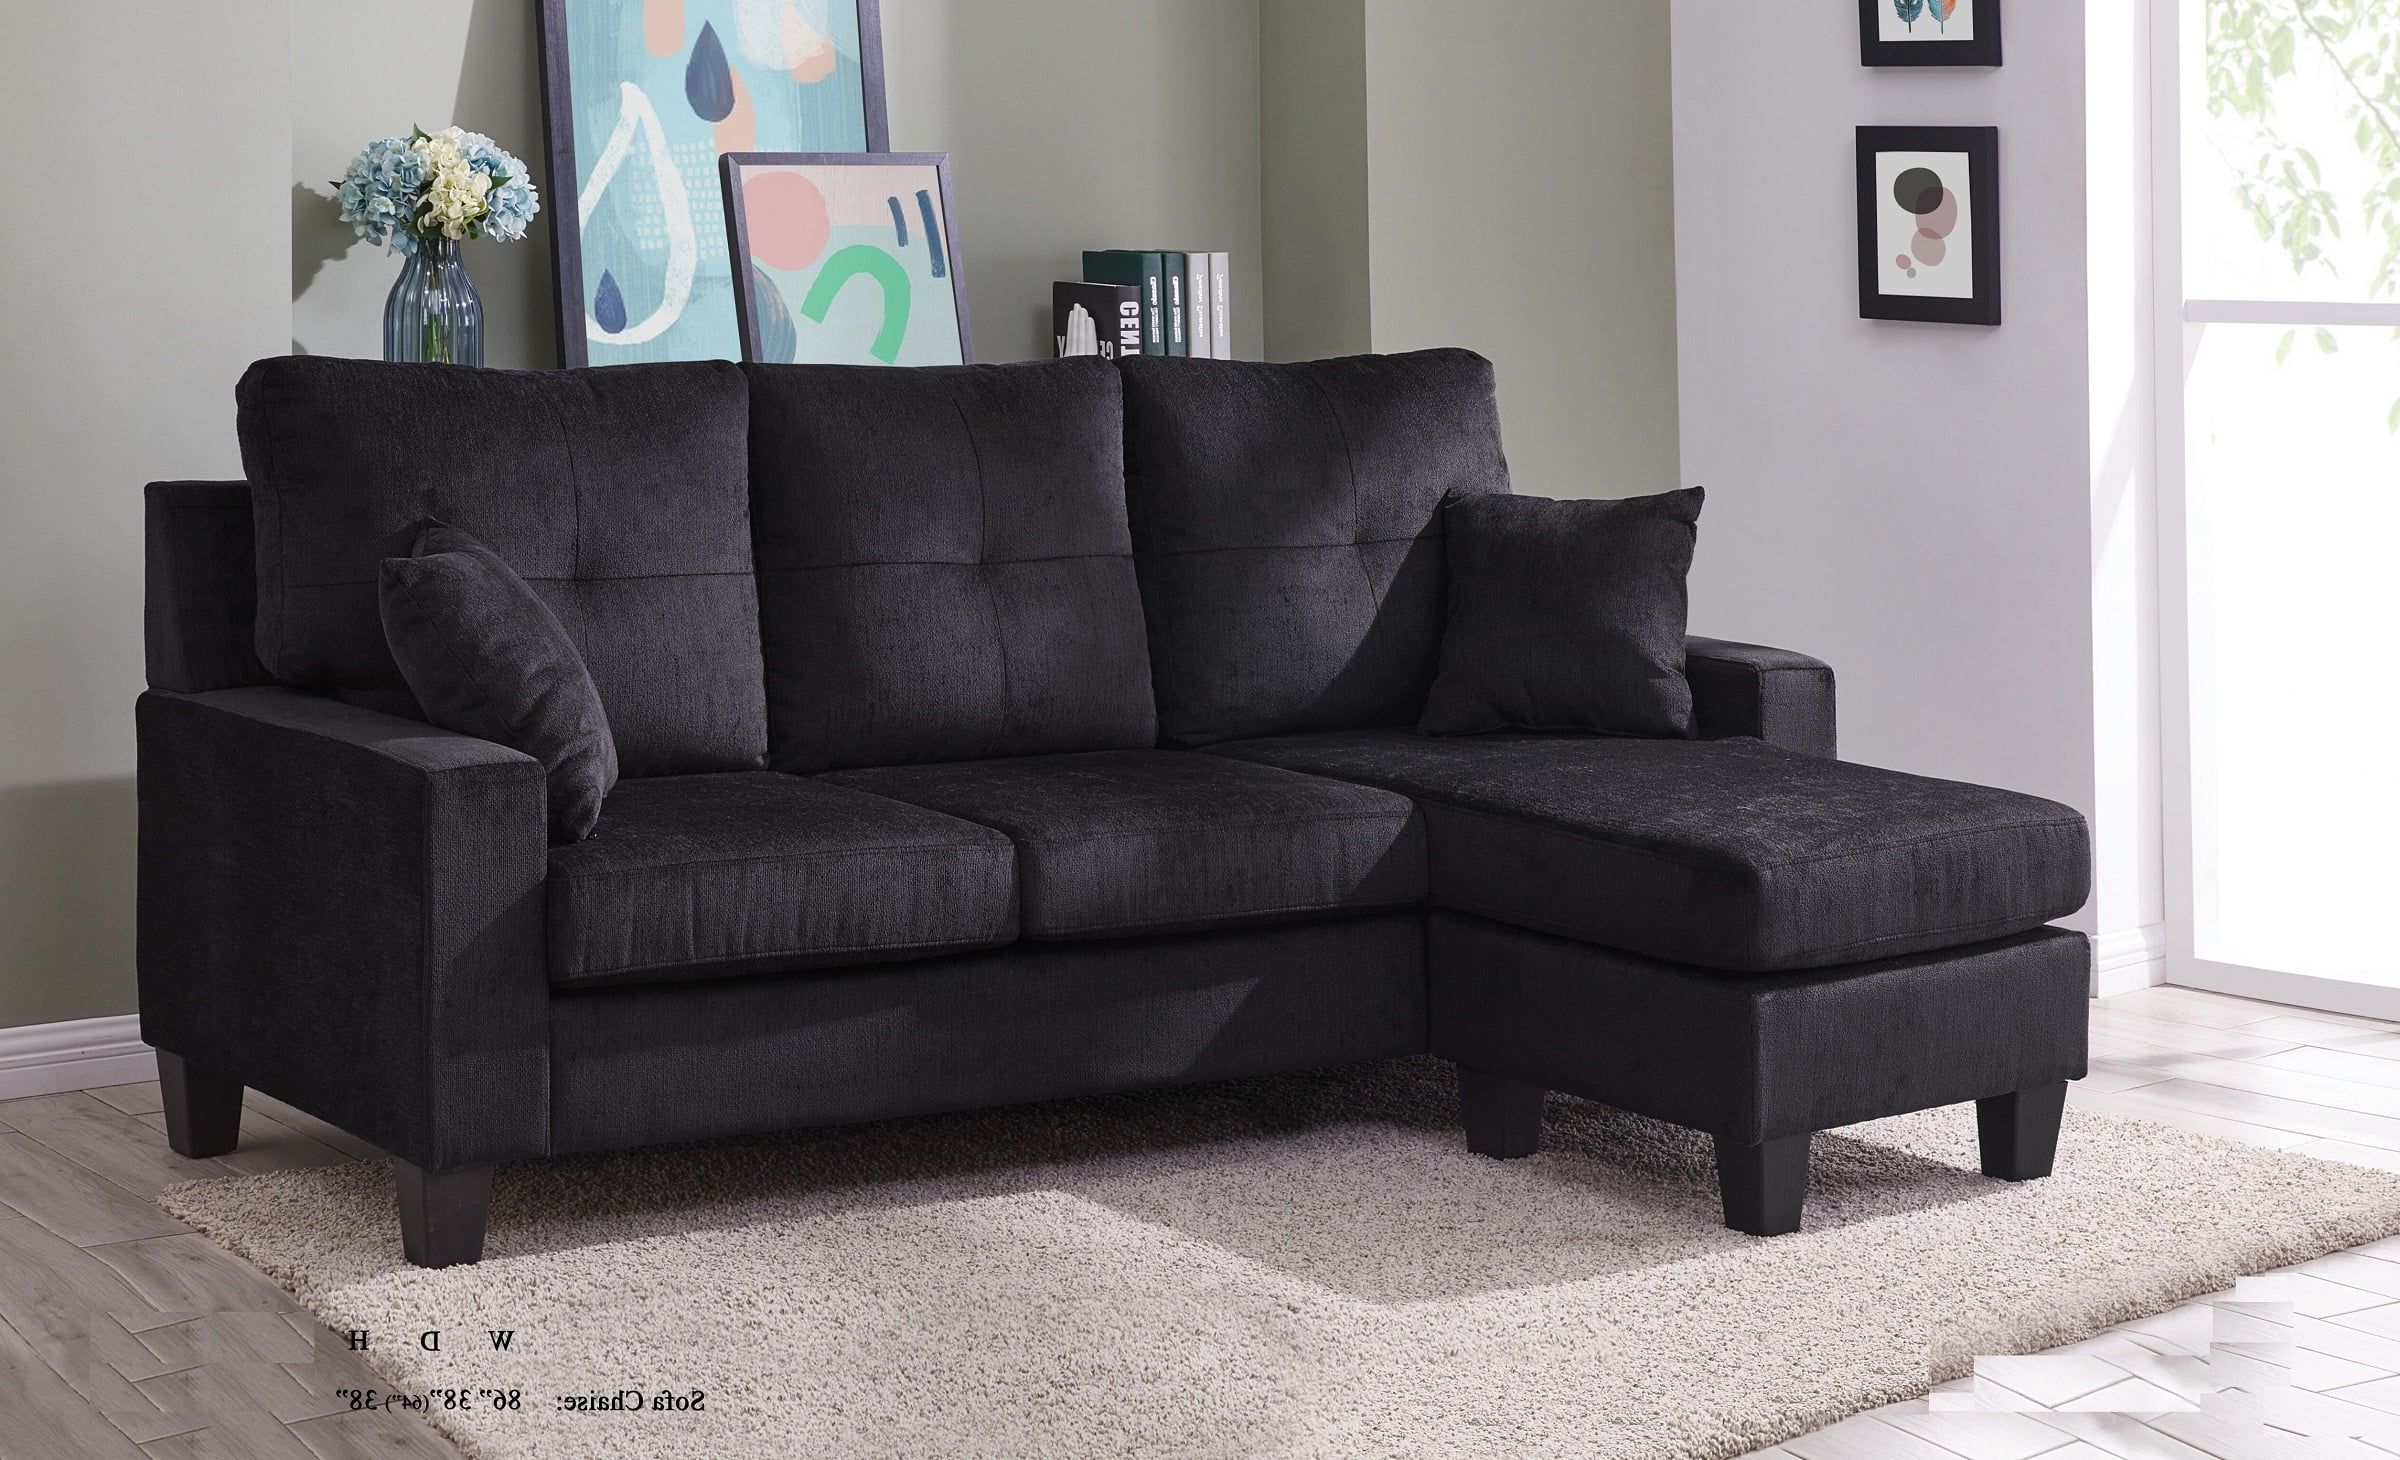 2017 Sectional Sofa Set Black Fabric Tufted Cushion Sofa Chaise Small Space Intended For Sofas In Black (View 11 of 15)